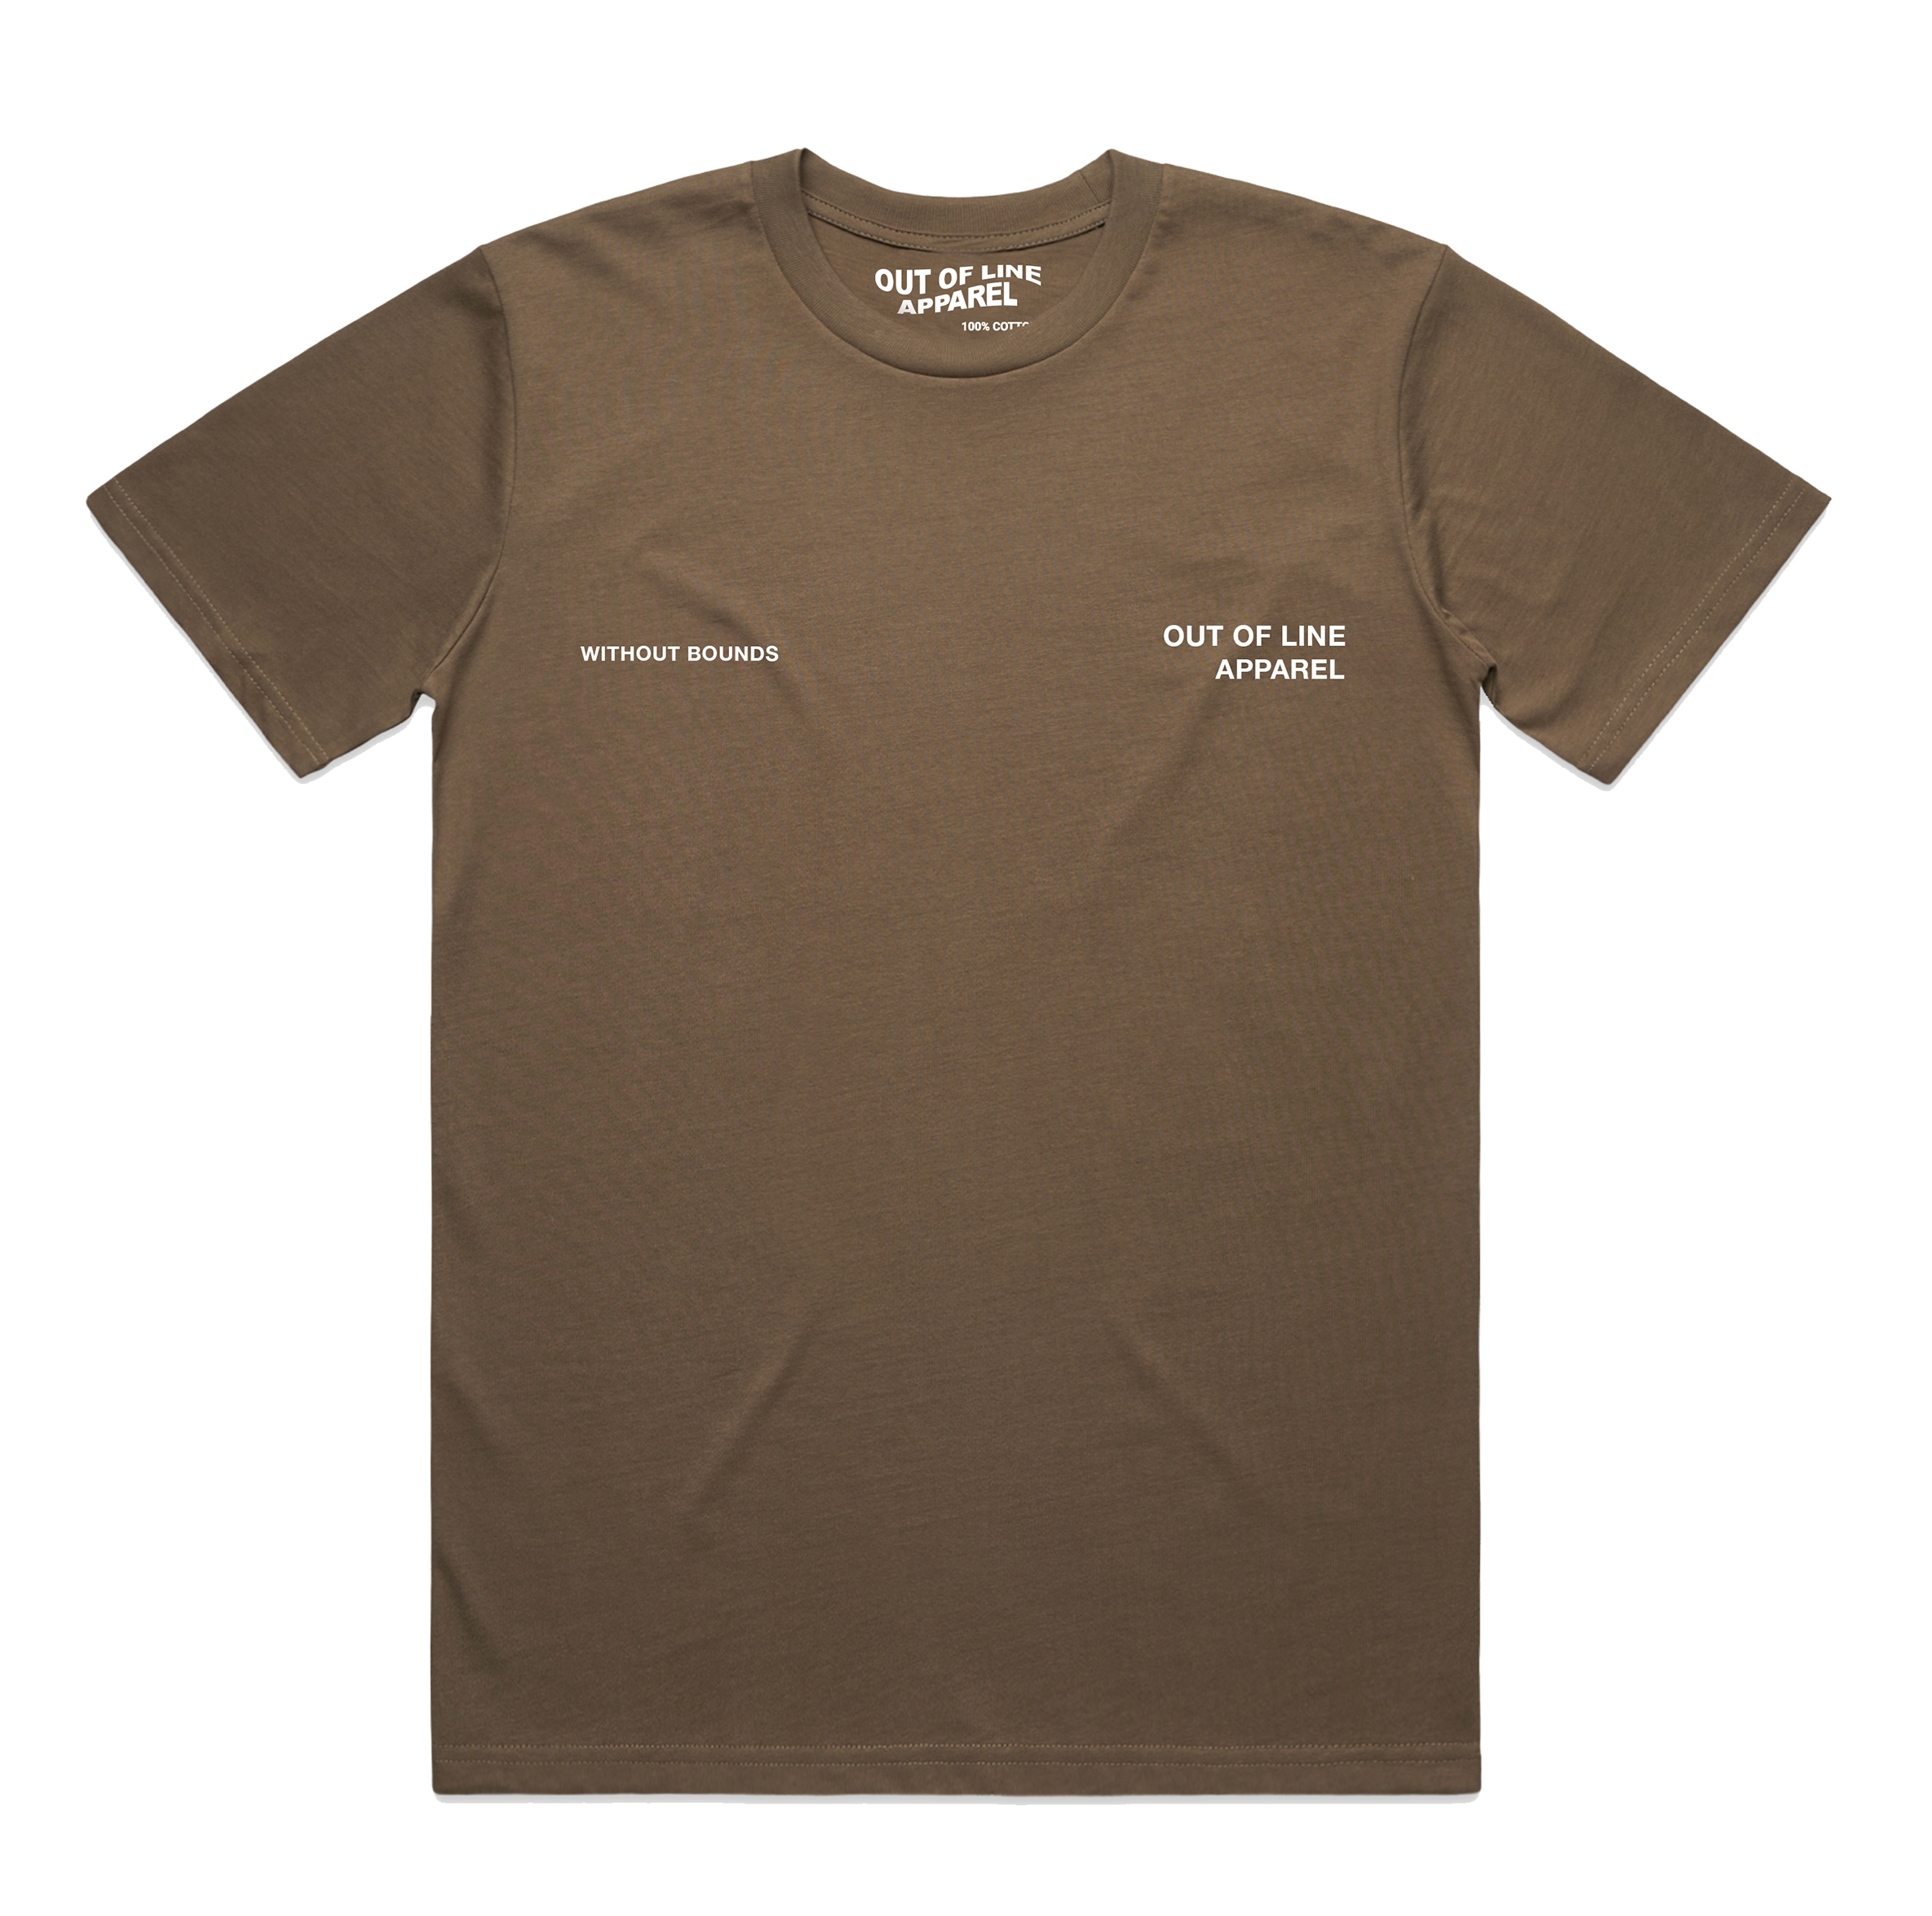 WALNUT "WITHOUT BOUNDS" TEE